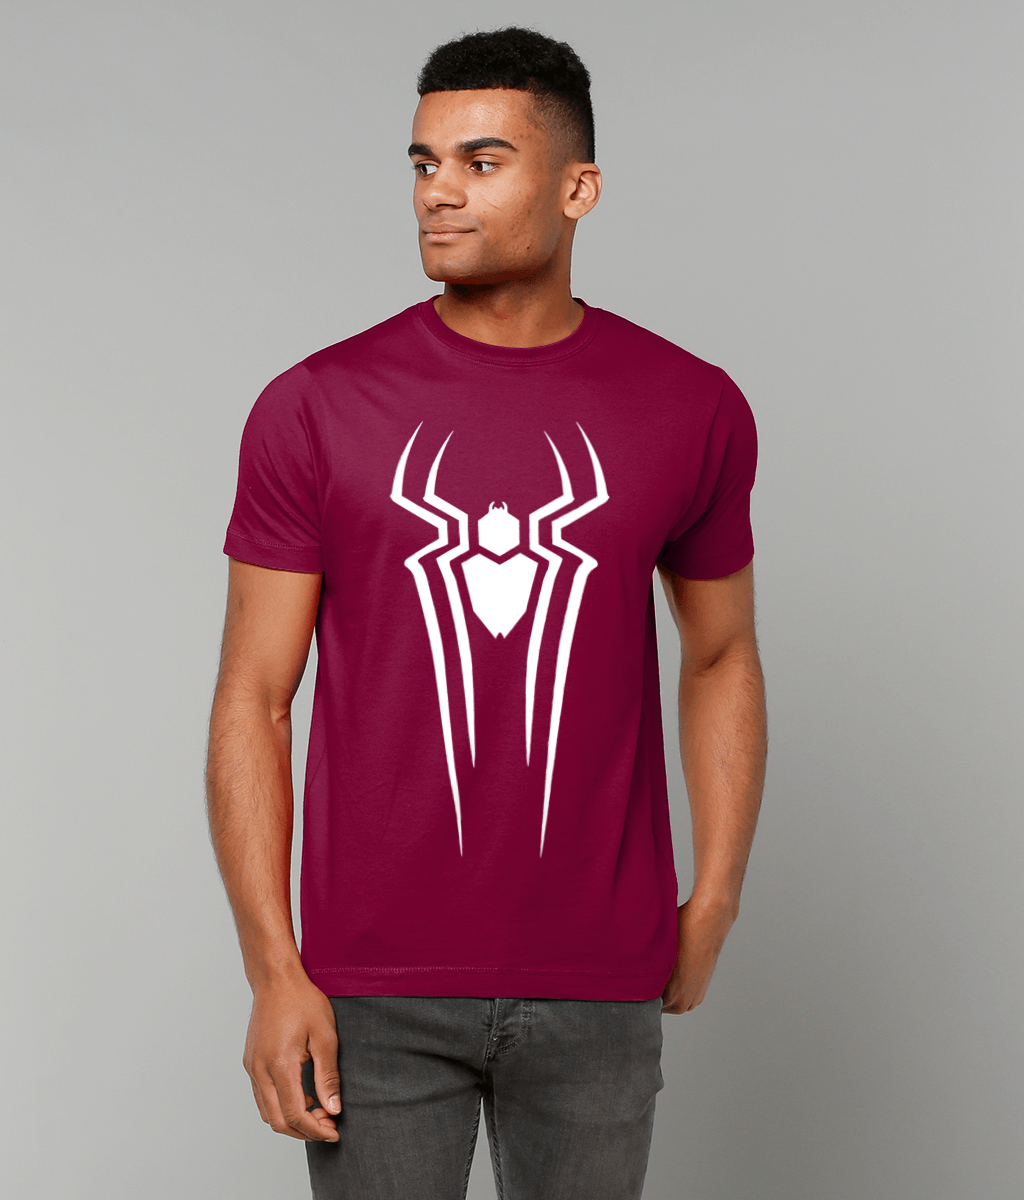 Spider-Man No Way Home Inspired Combination T-Shirt